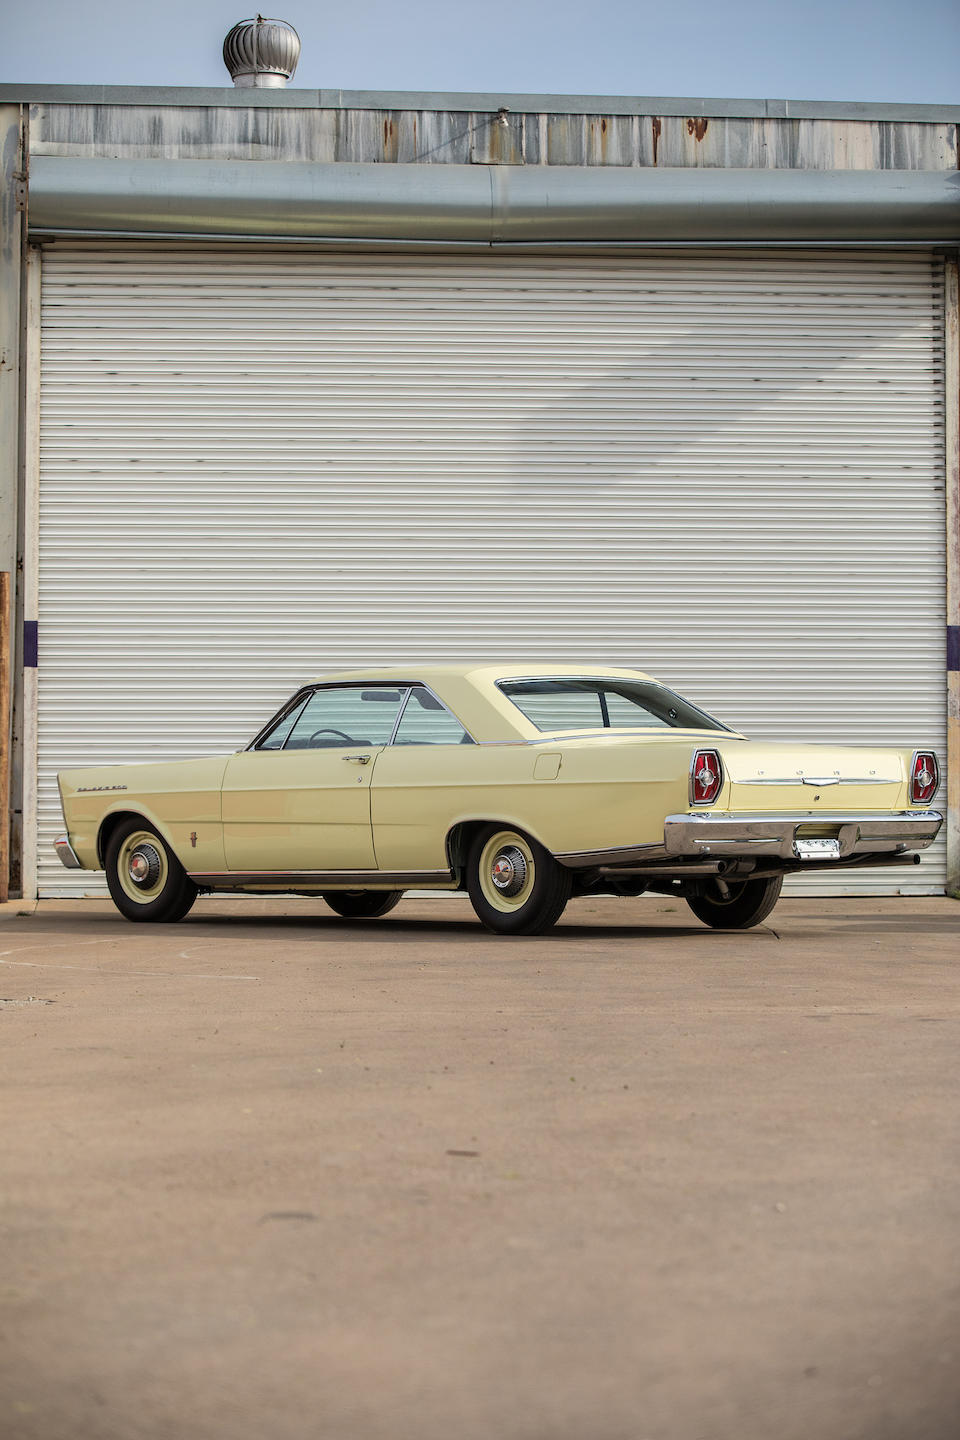 <b>1965 Ford Galaxie 500 M-Code "Cammer" 2-Door Hardtop</b><br />Chassis no. 5F66M100016